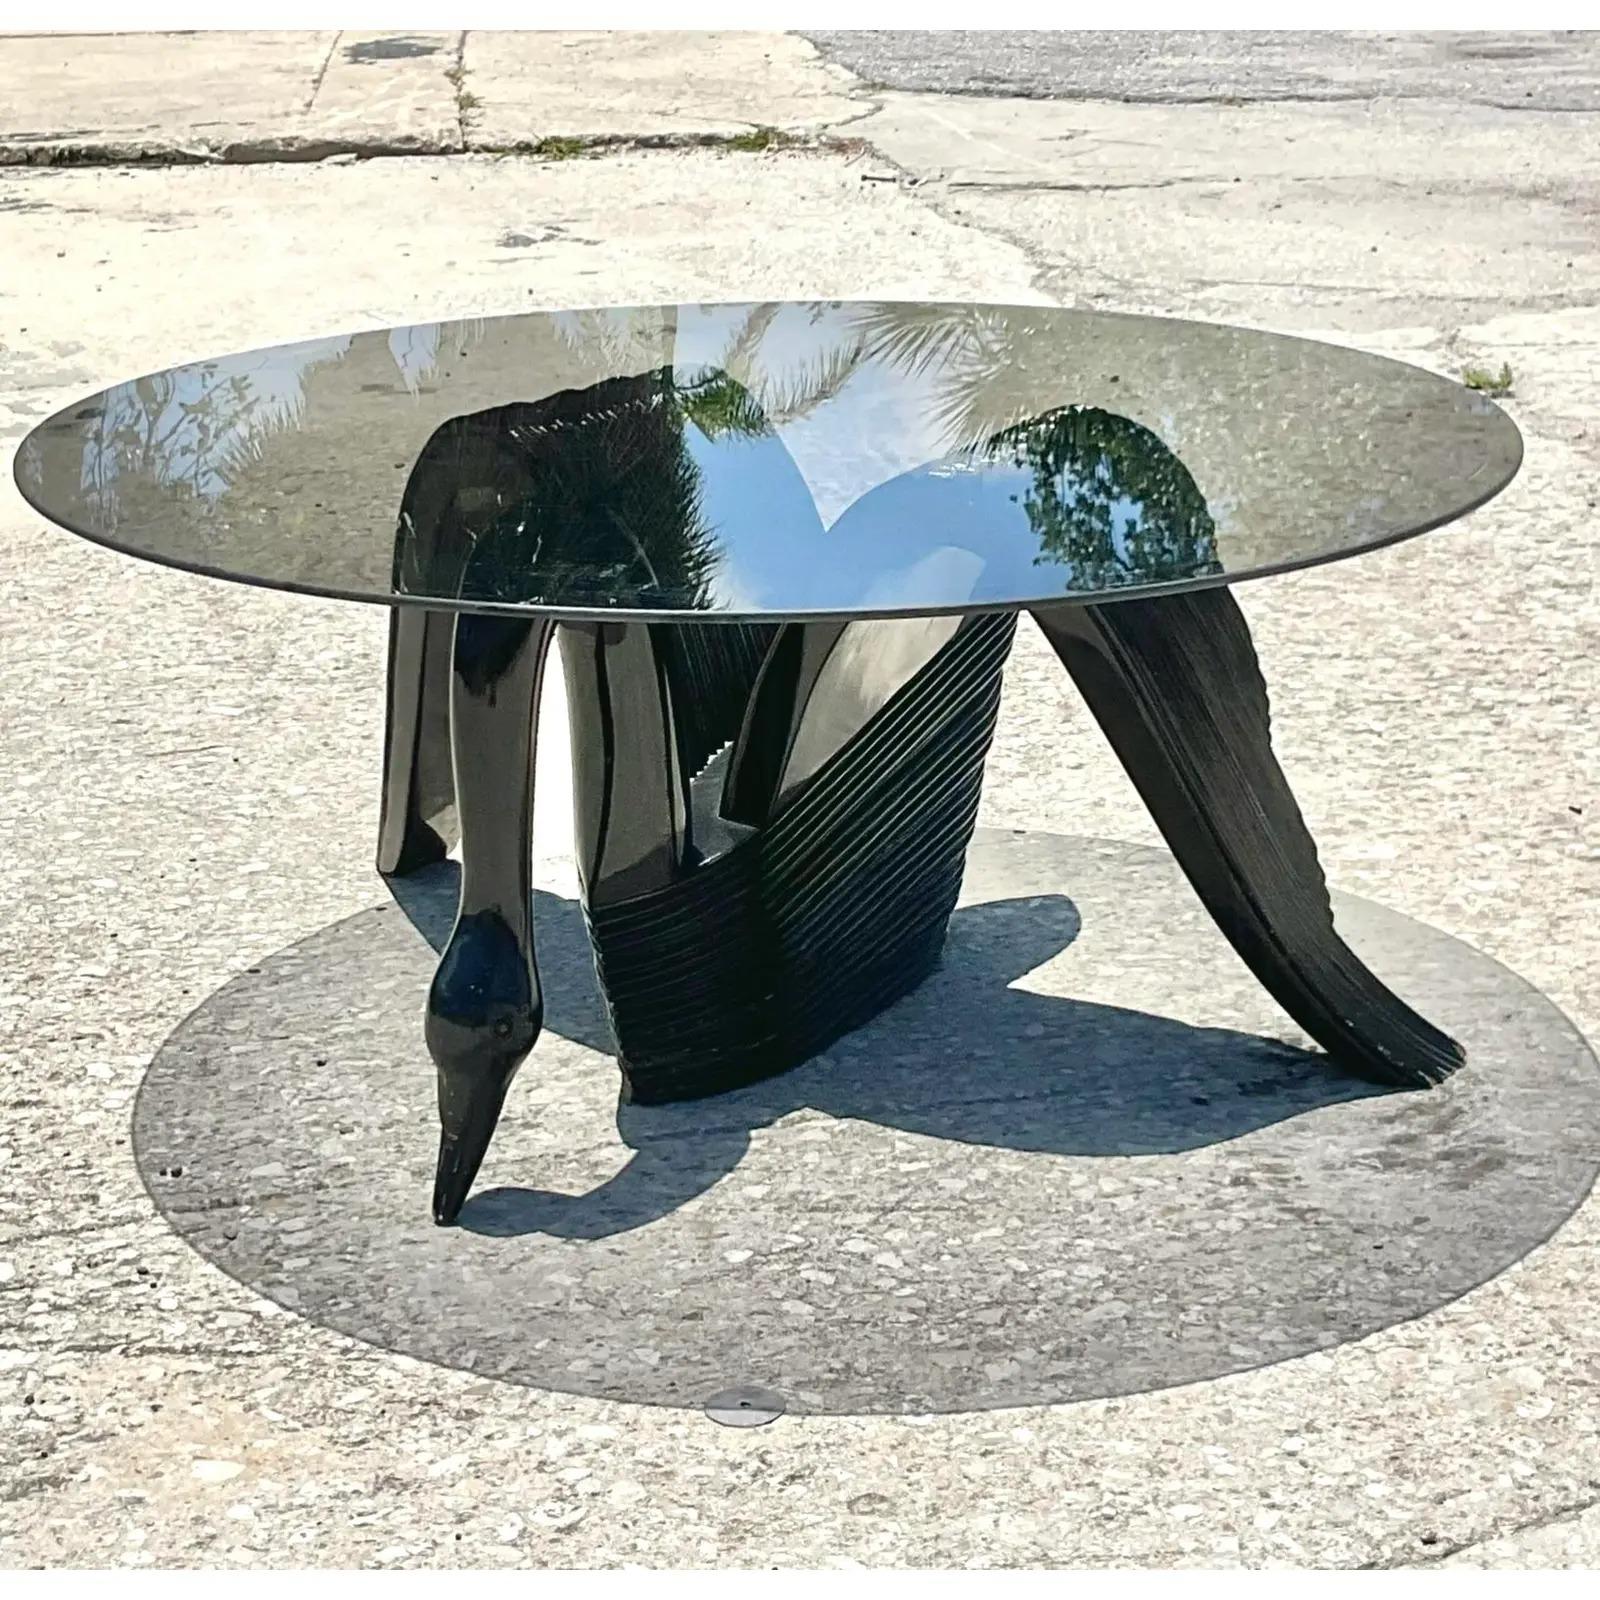 Fantastic vintage Coastal coffee table. Beautiful black lacquer high gloss finish. A fabulous swan shape with a smoked glass top. Happy to switch it out to clear glass if preferred. Acquired from a Palm Beach estate.